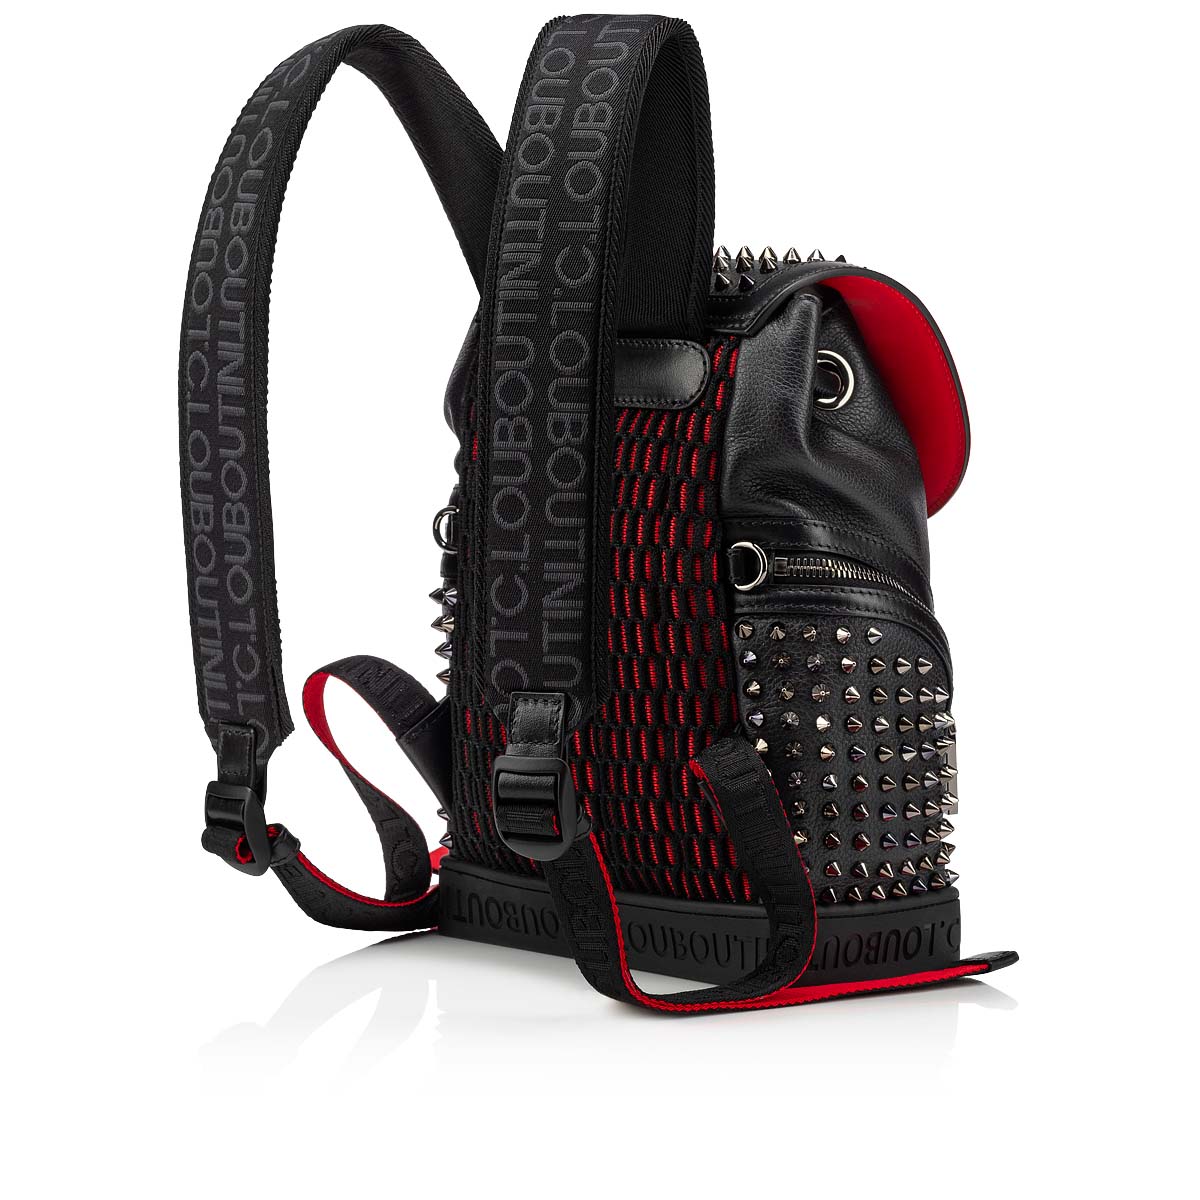 Explorafunk small - Backpack - Calf leather and spikes - Black 